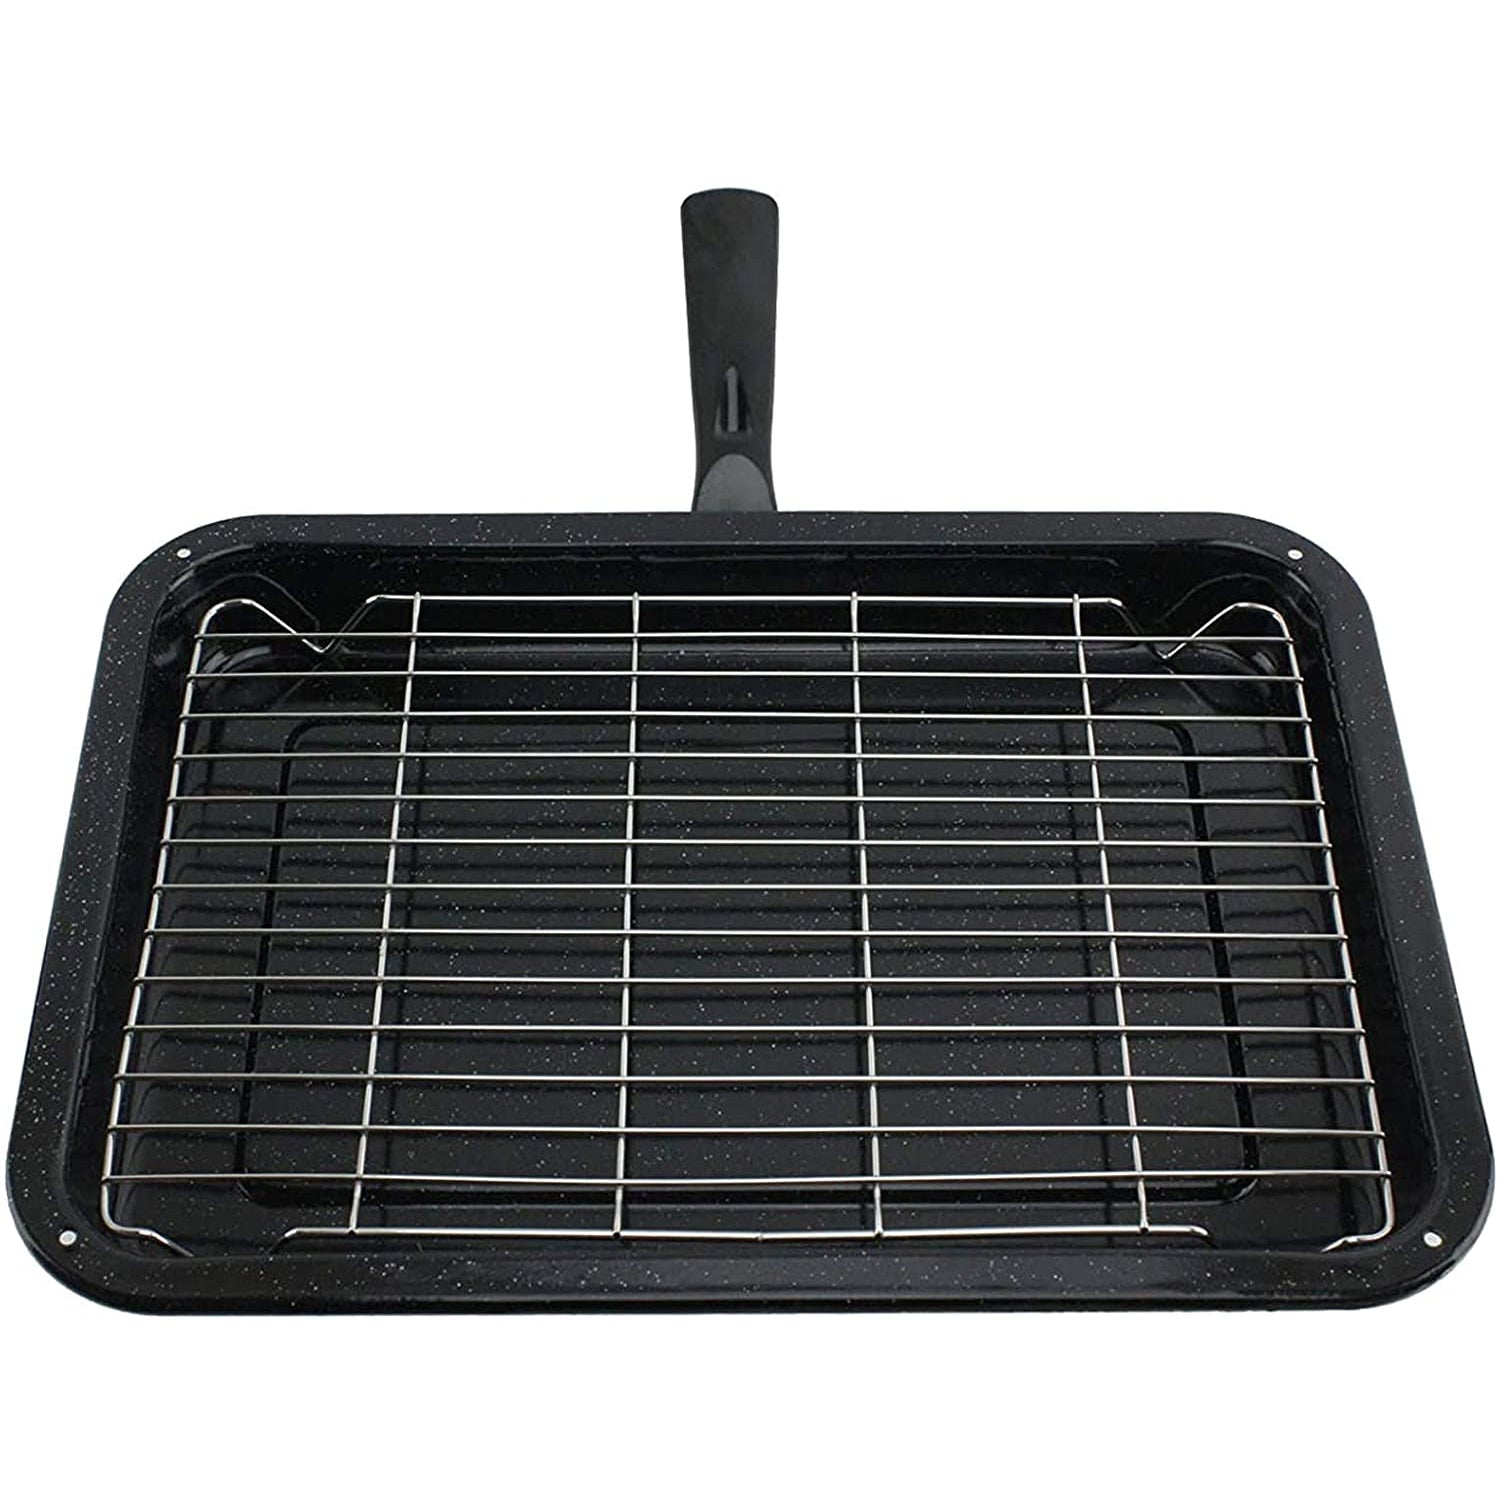 UNIVERSAL Small Grill Pan Rack and Detachable Handle for Oven Cooker + 10 Protective Fat/Grease Absorbent Foil Pads